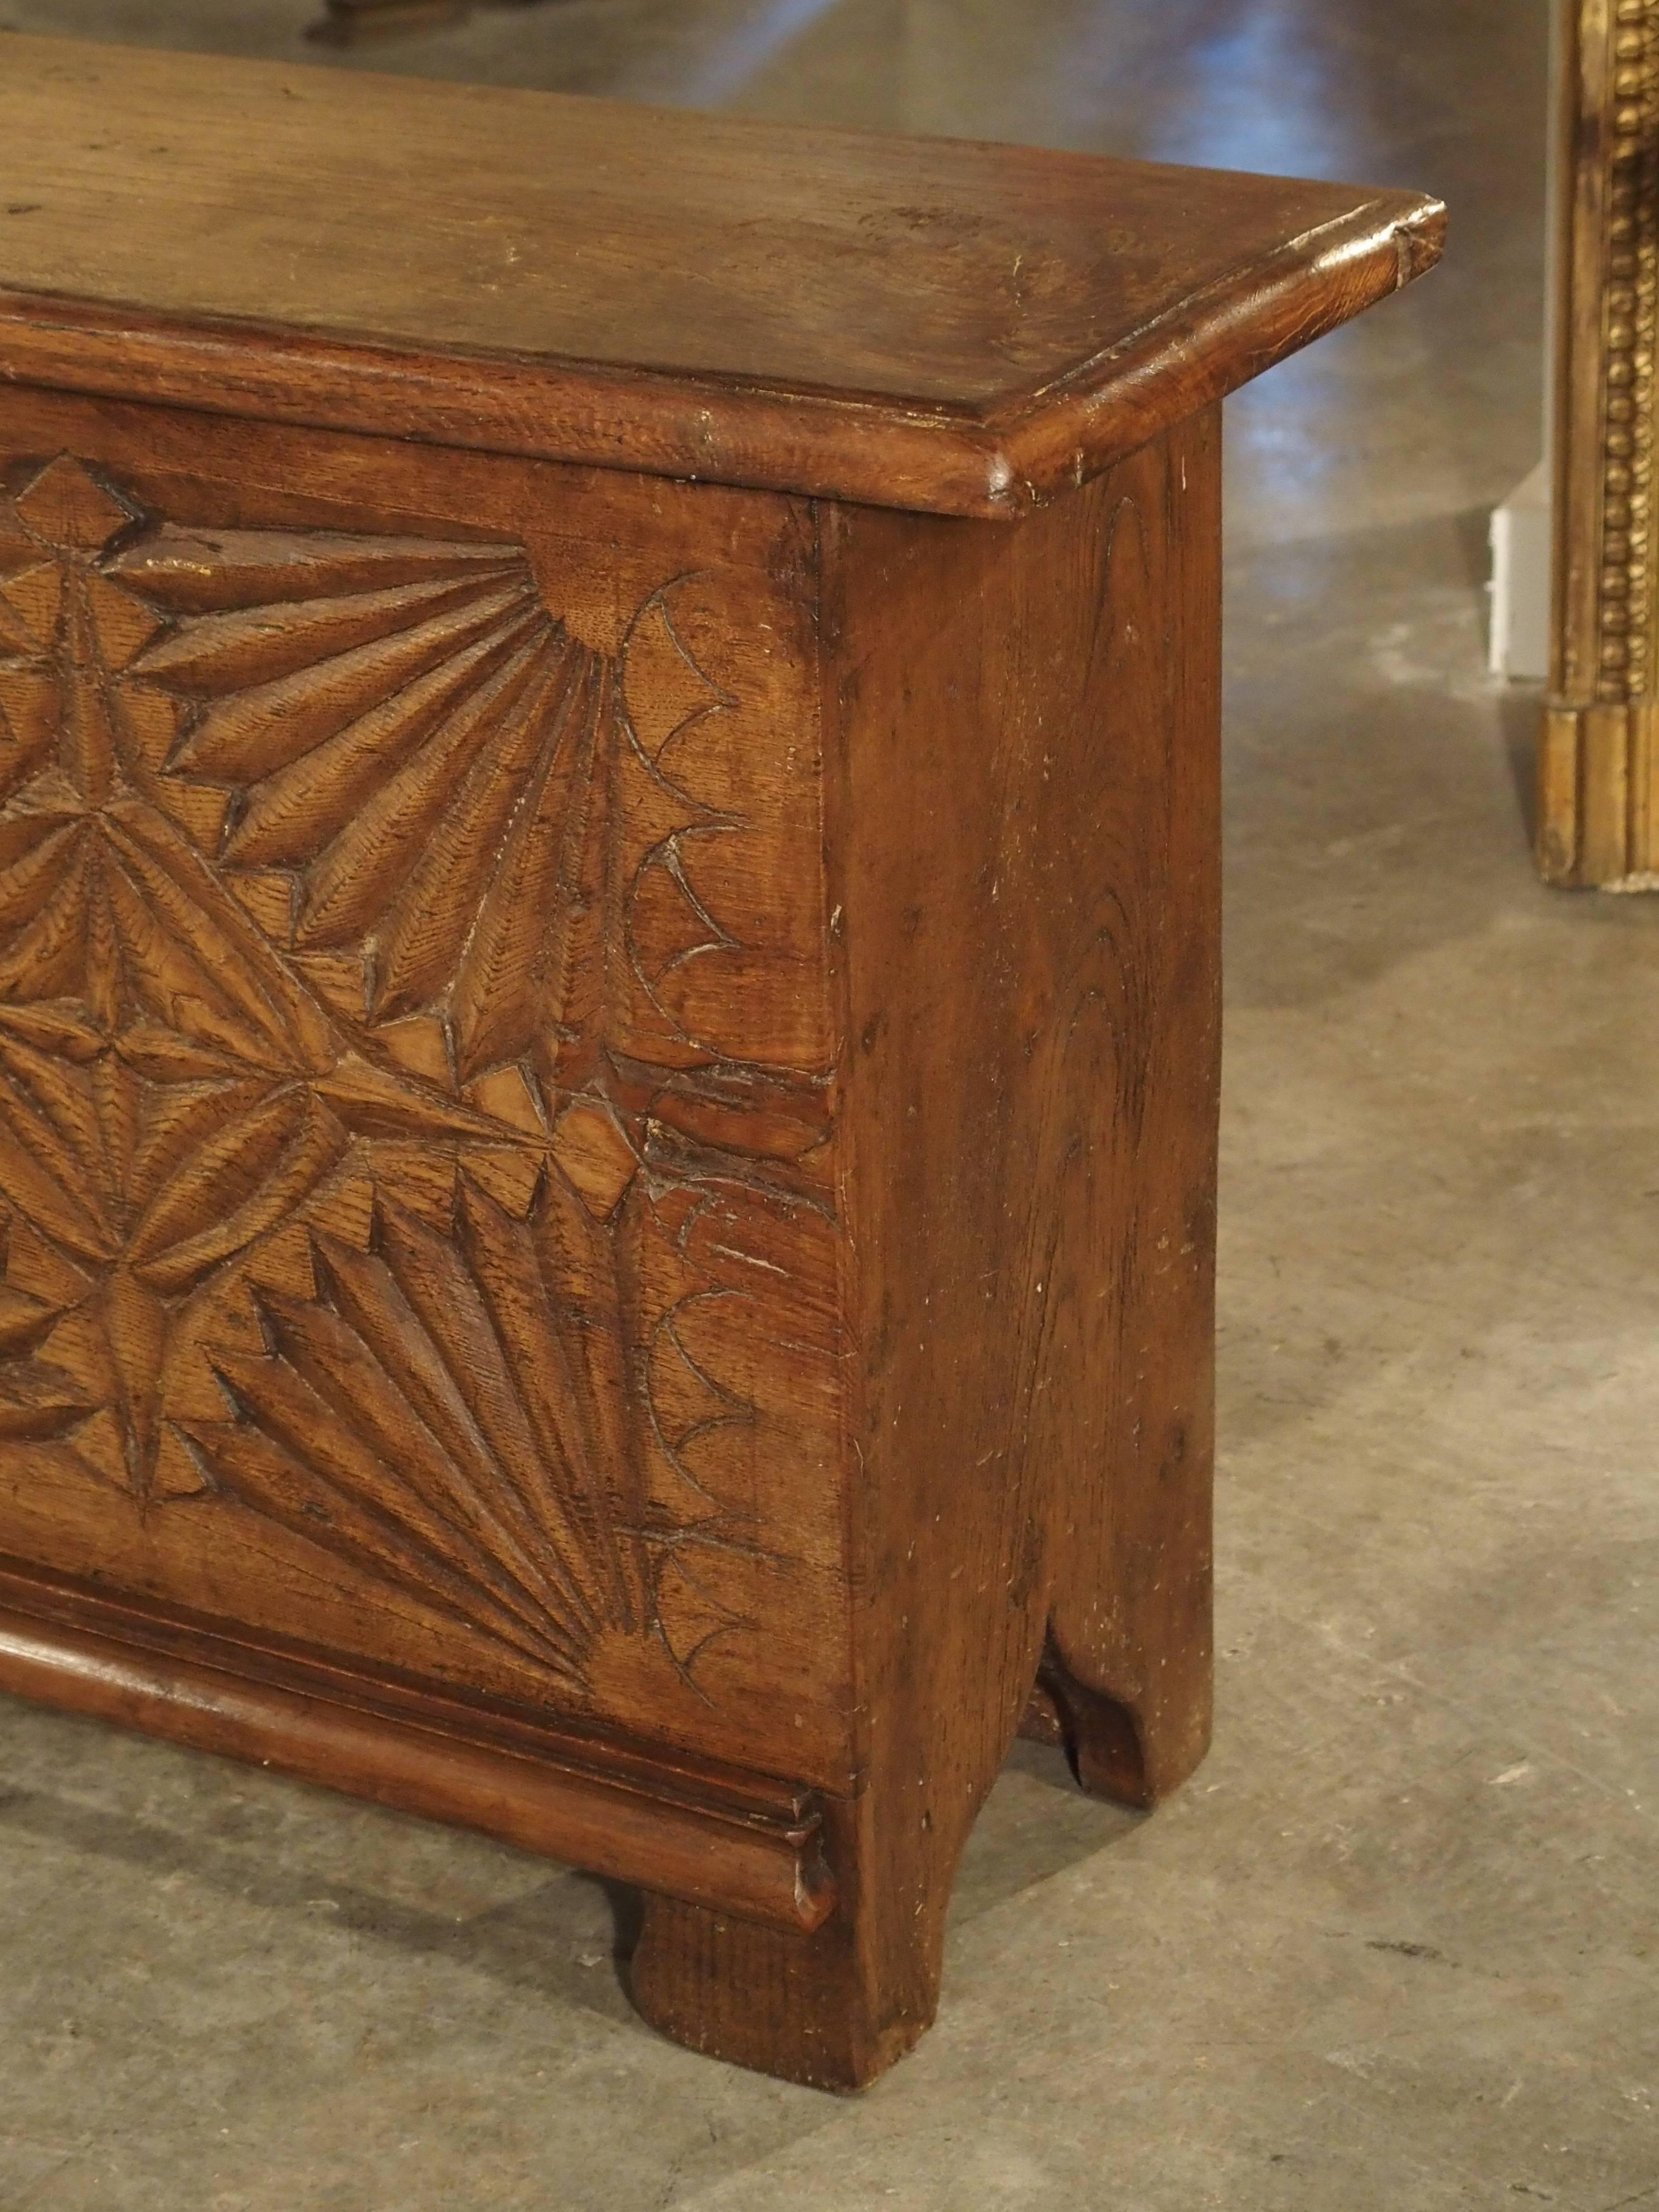 Oak Trunk from France with Detailed Hand-Carved Front Panel 2